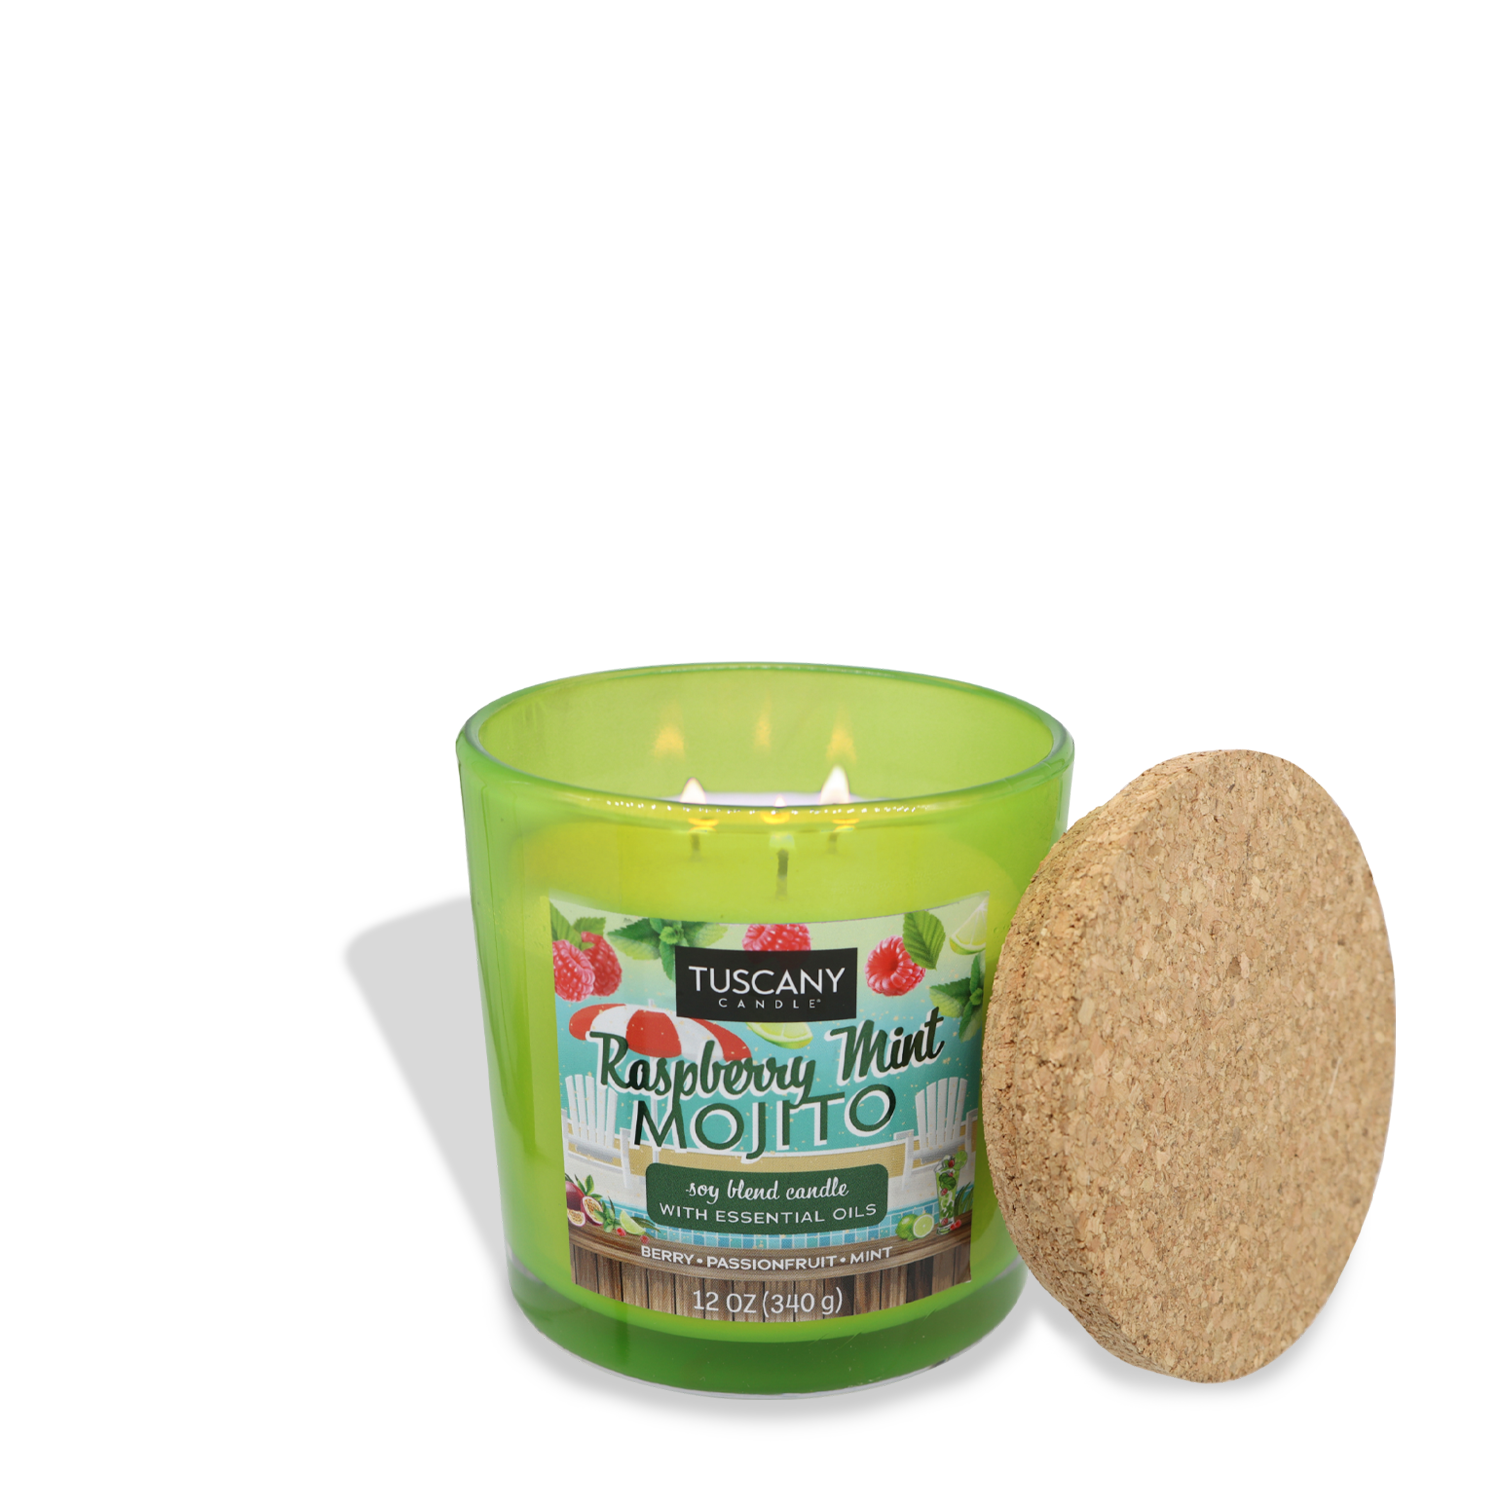 A green candle in a glass jar labeled "Raspberry Mint Mojito (12 oz) – Sunset Beach Bar Collection" by Tuscany Candle® SEASONAL, with a cork lid beside it. The candle, a soy blend with essential oils, emits the invigorating scent of raspberries and freshly crushed mint as it softly glows.